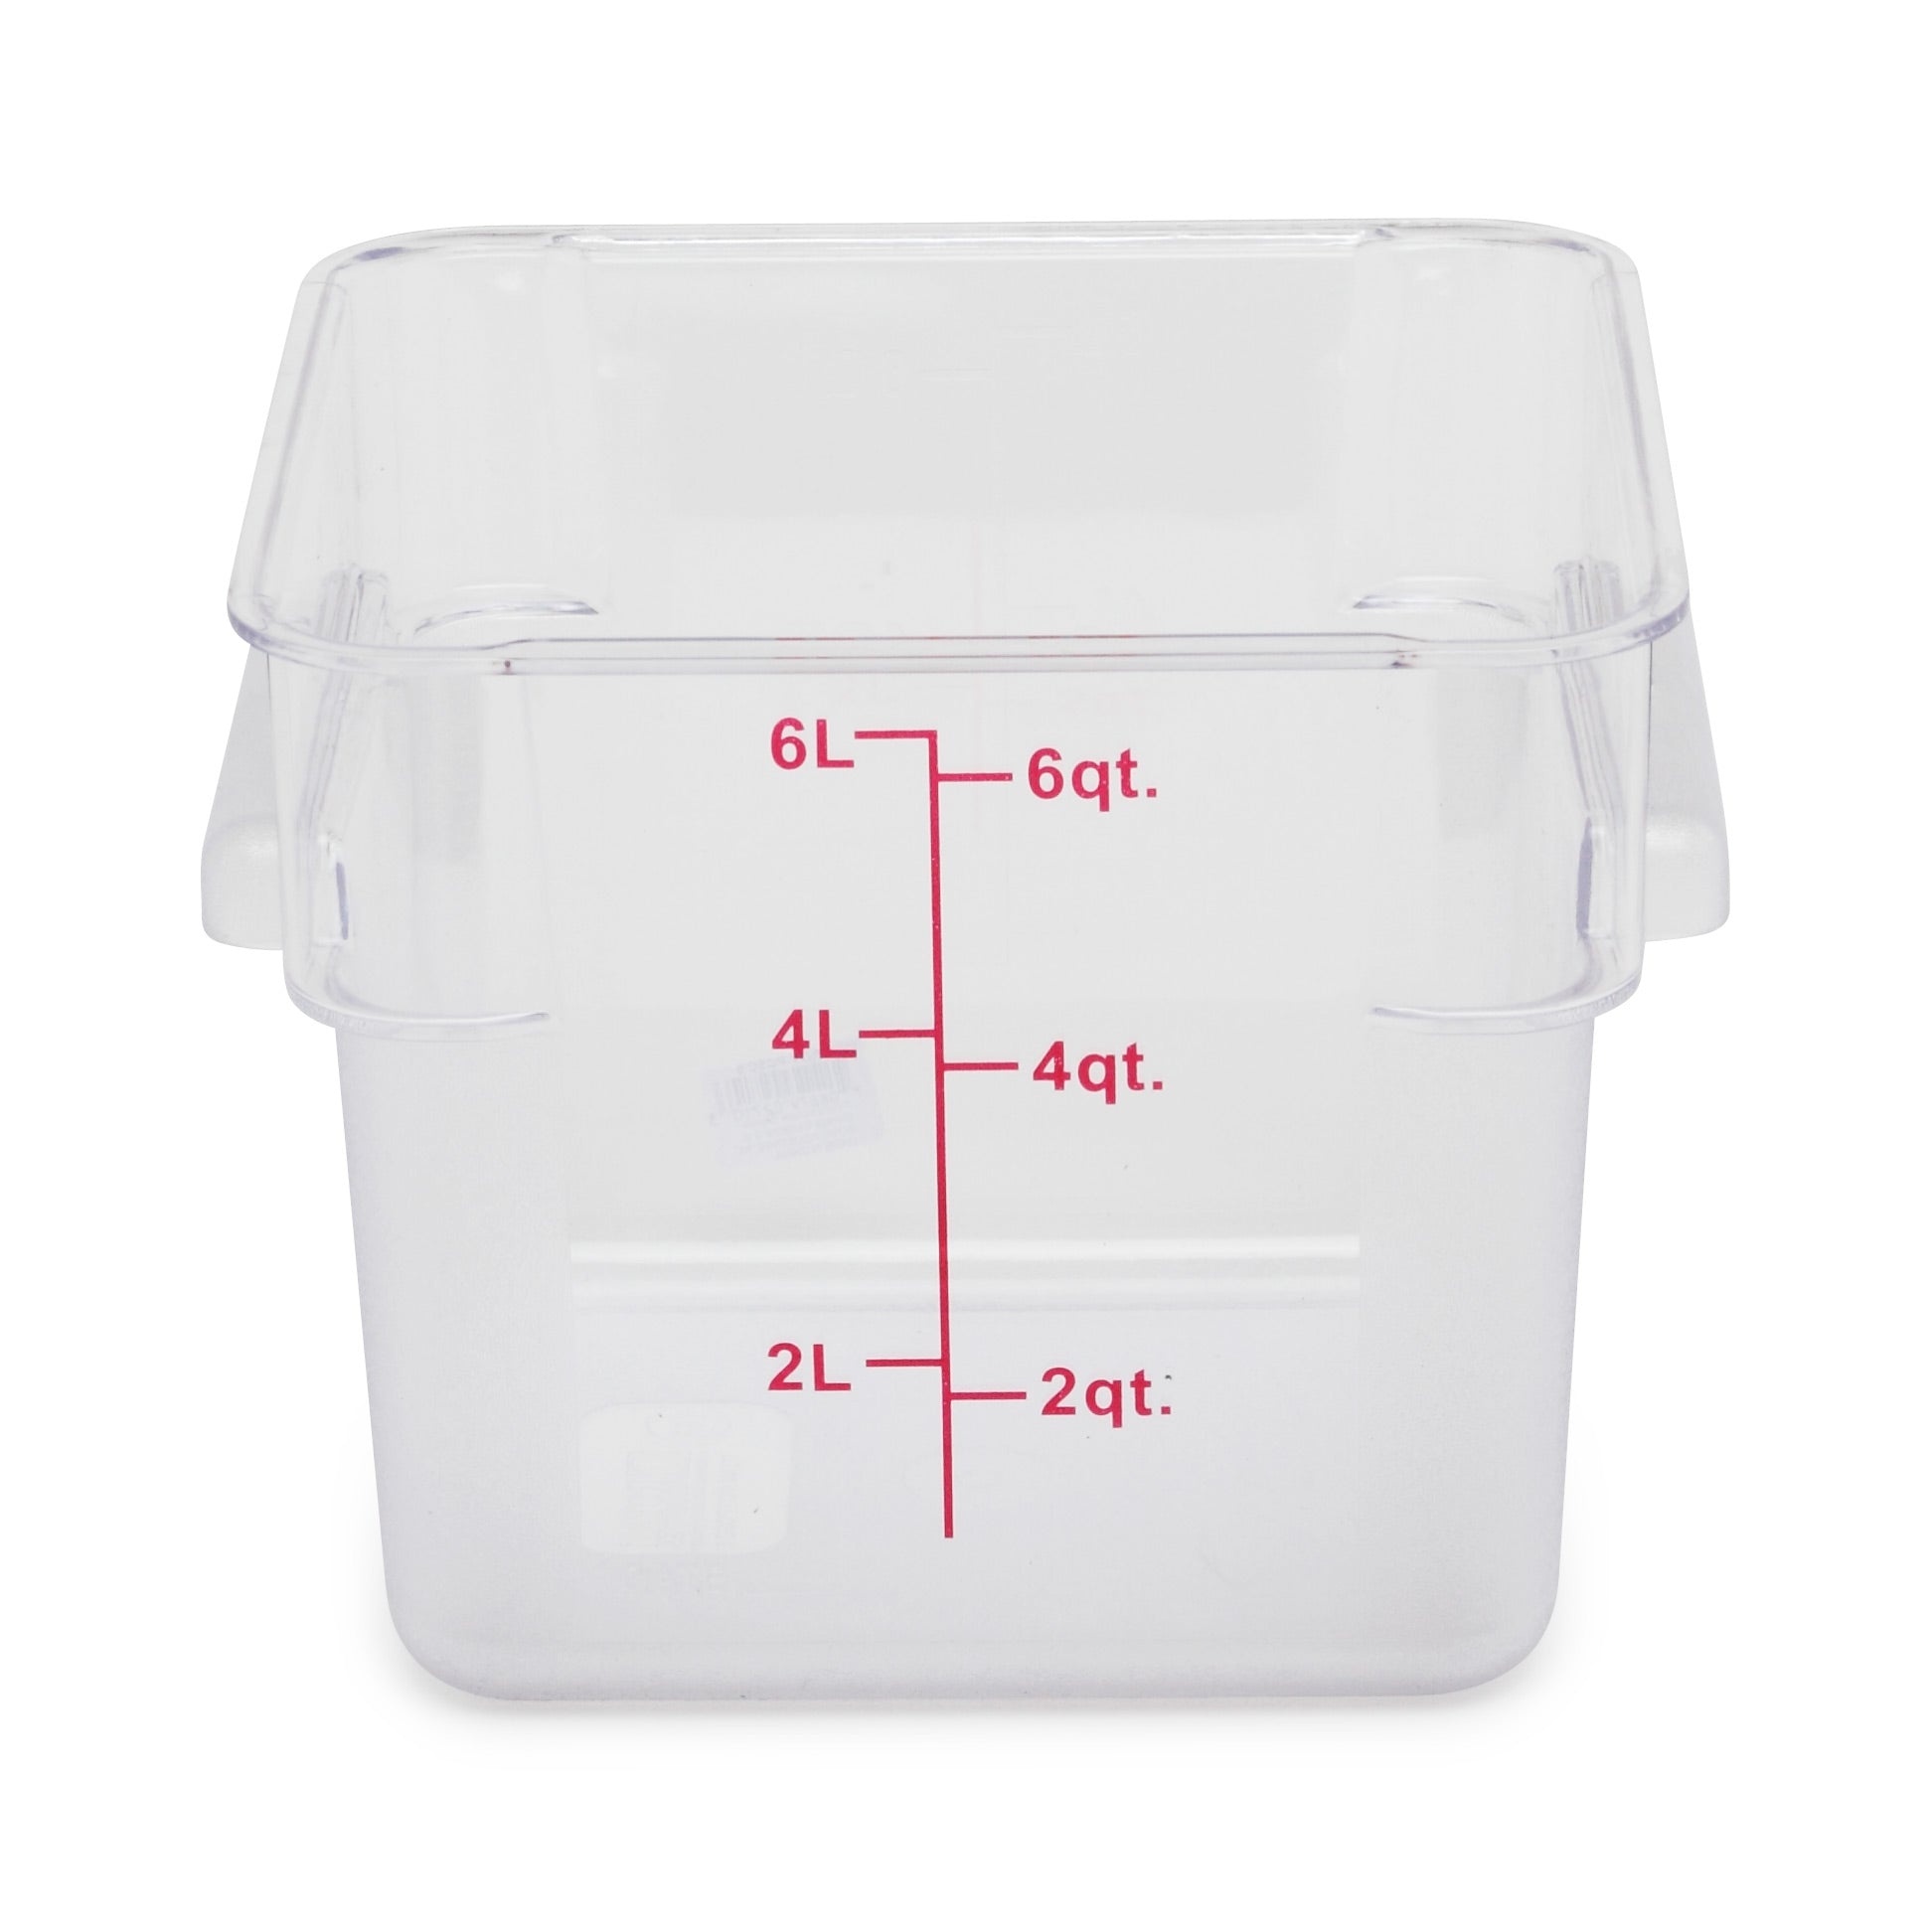 Royal Industries Clear Polycarbonate Square Storage Container